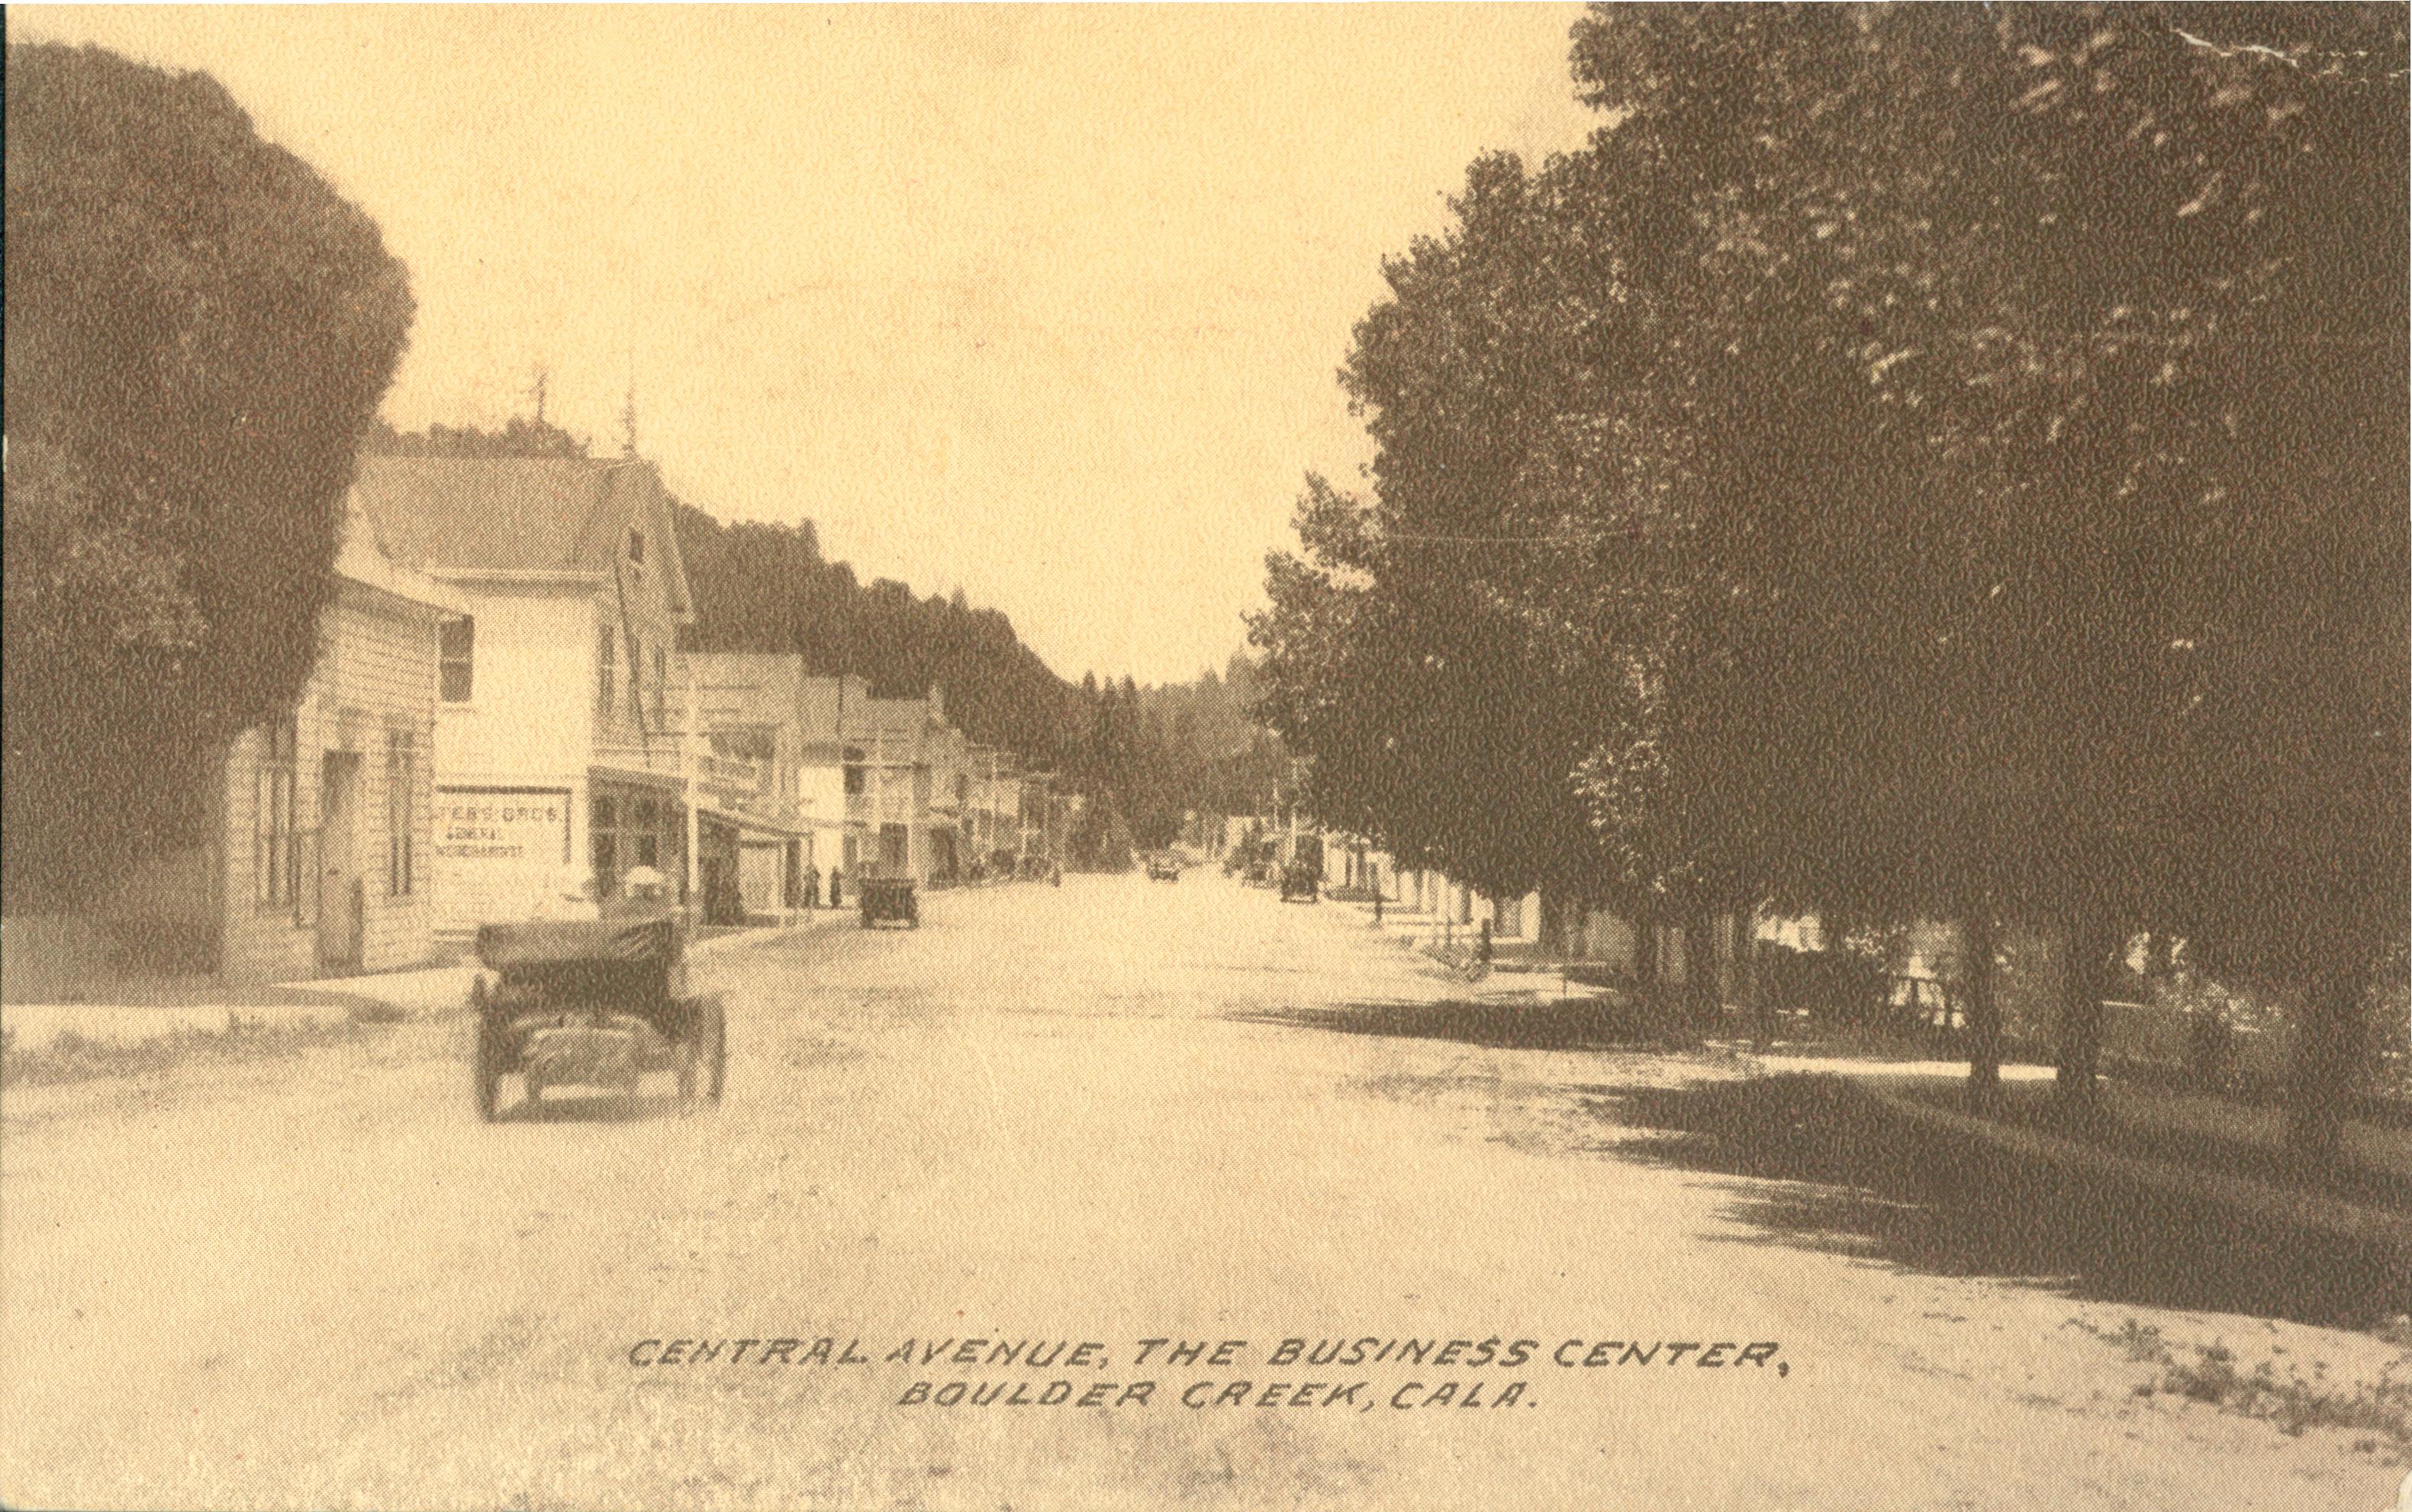 Automobiles traveling down dirt road with buildings to the left and trees to the right